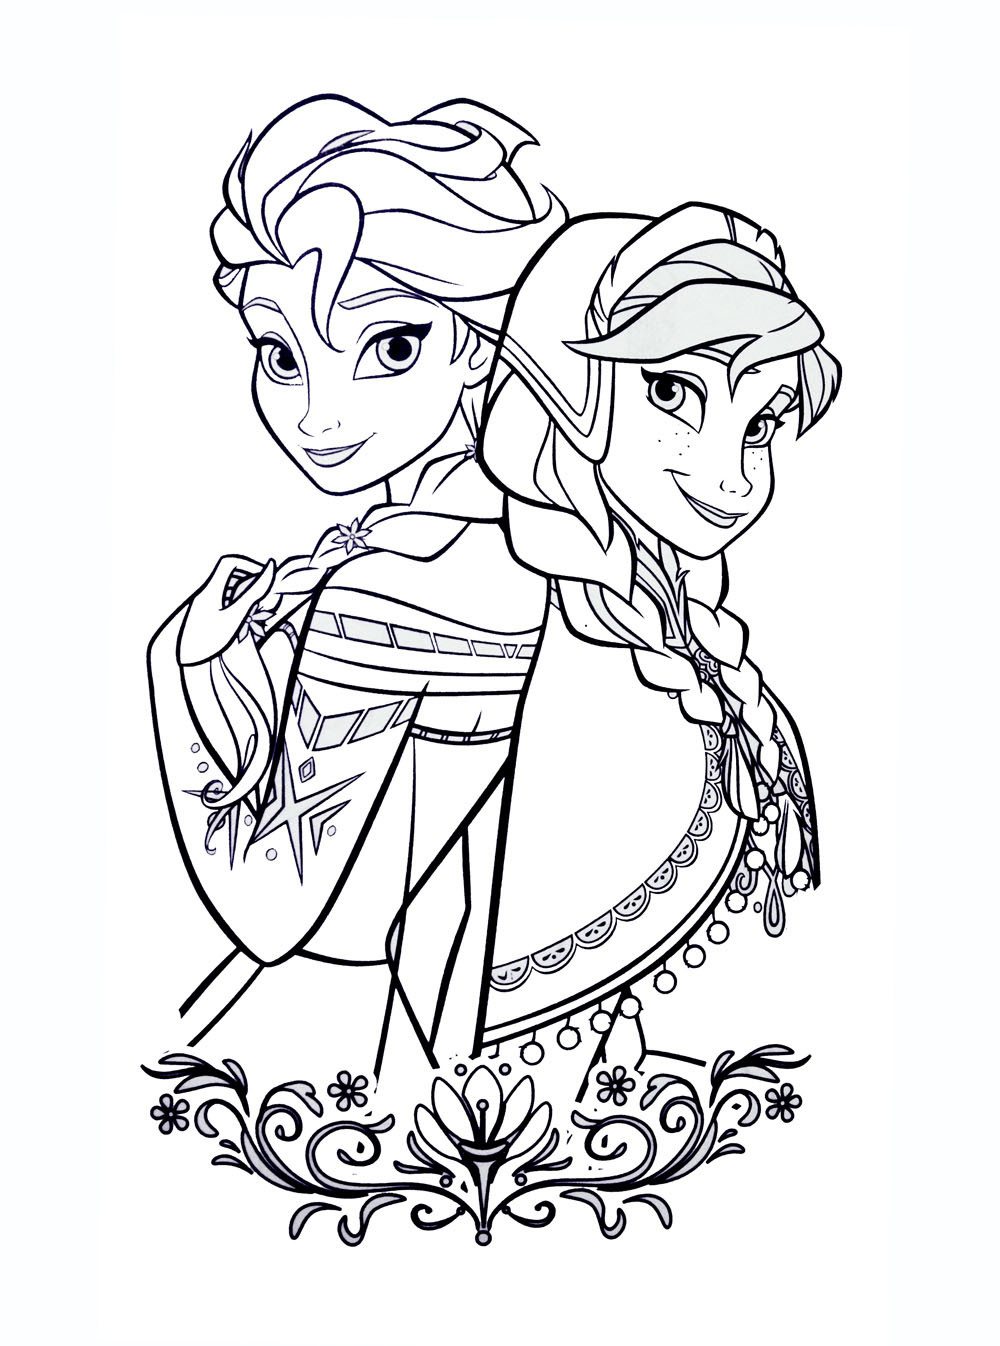 Kids On Line Coloring Pages
 Frozen free to color for kids Frozen Kids Coloring Pages